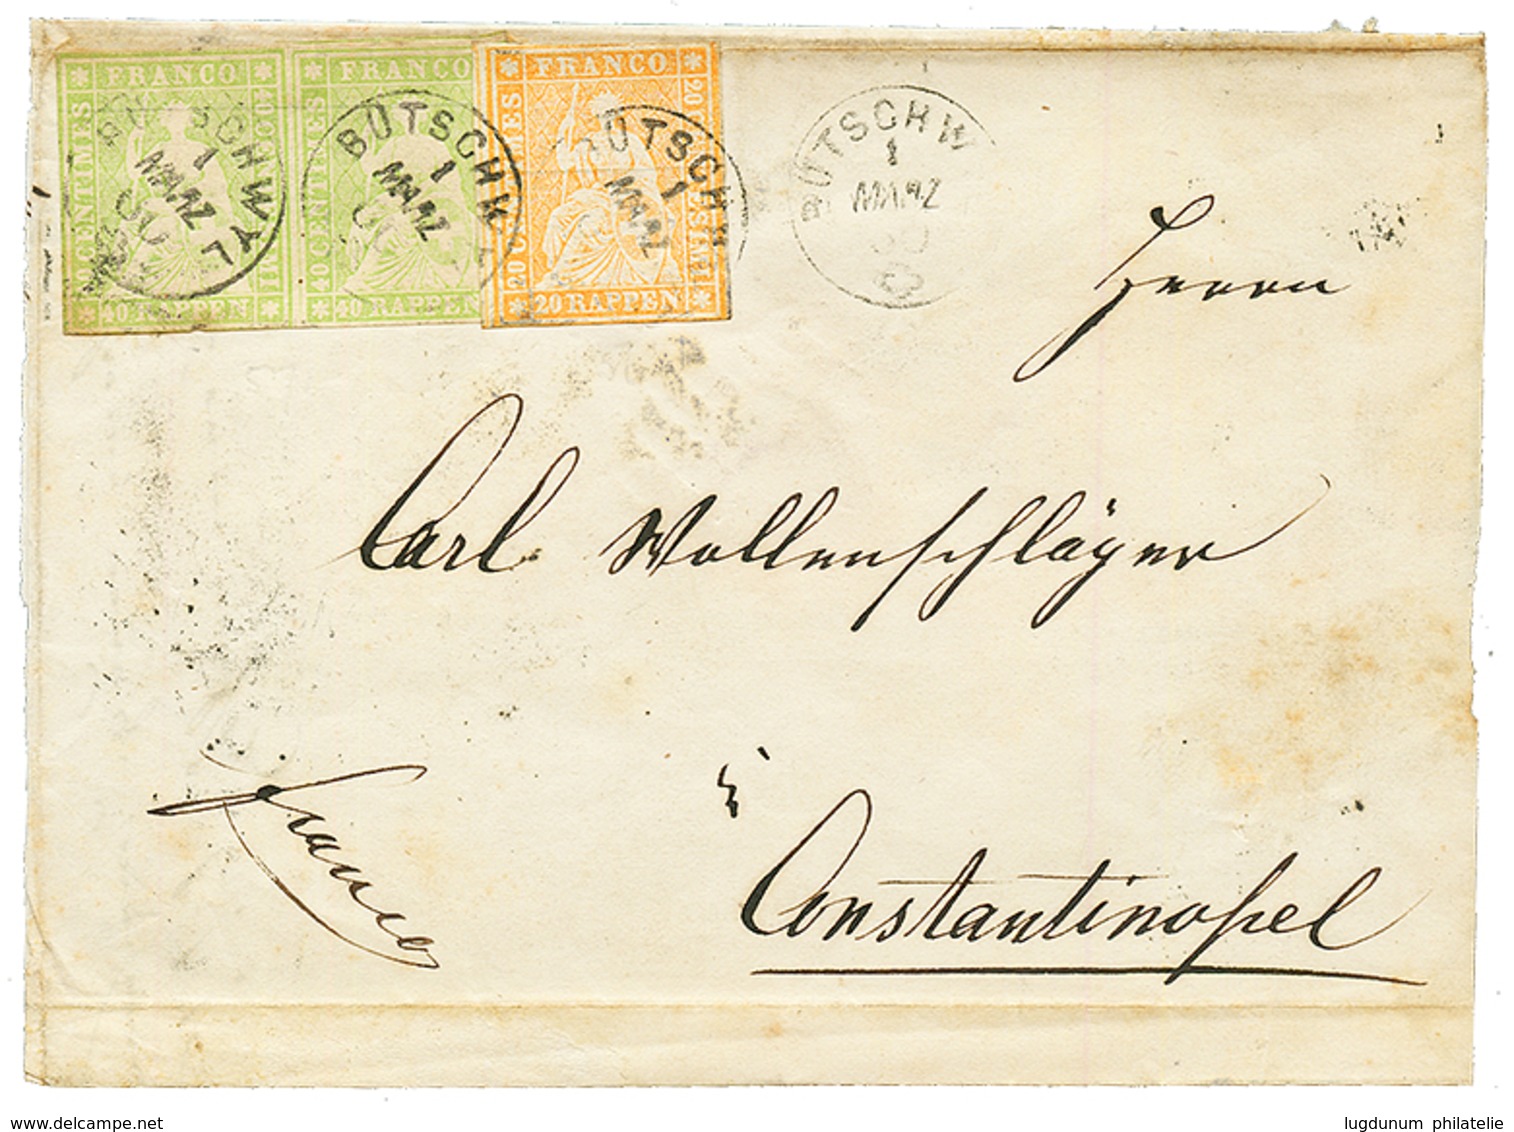 "CONSTANTINOPLE Via TRIEST" : 1860 SWITZERLAND 20R + Pair 40R Canc. BOTSCHWYL On Entire (side Flap Missing) To CONSTANTI - Eastern Austria